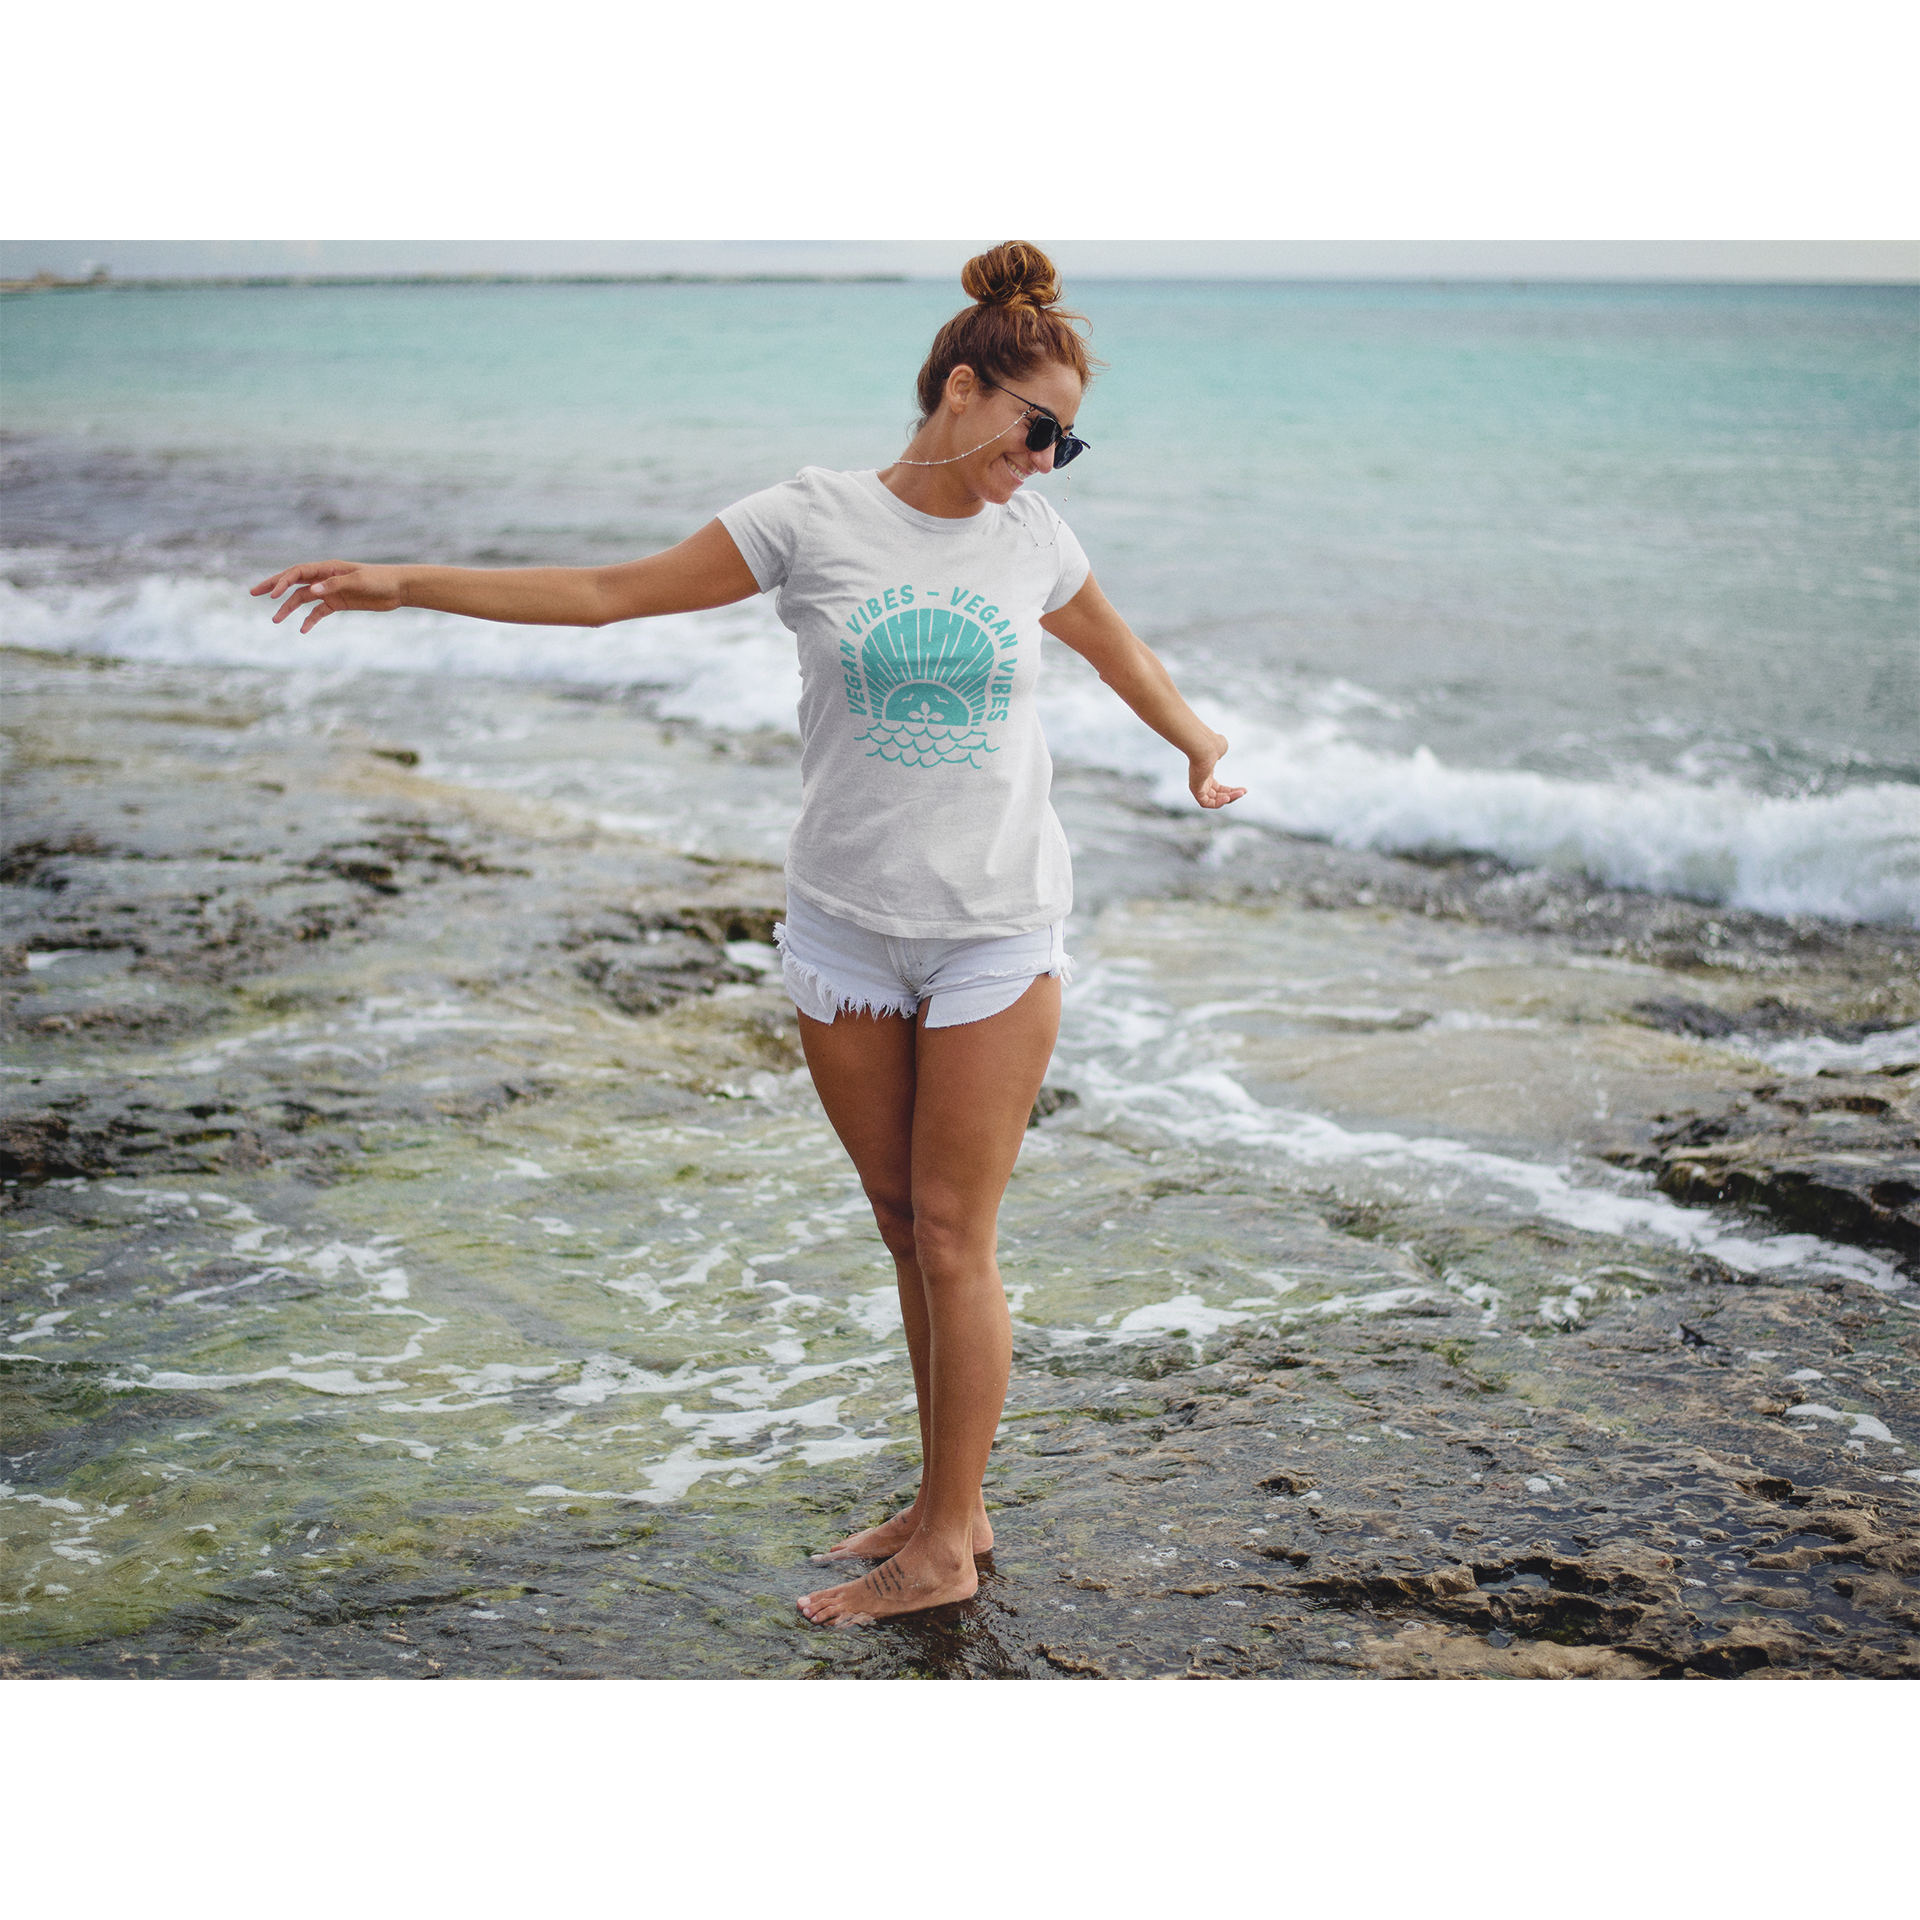 woman on a beach wearing a vegan vibes vegan tshirt with a teal design on a premium white cotton fabric